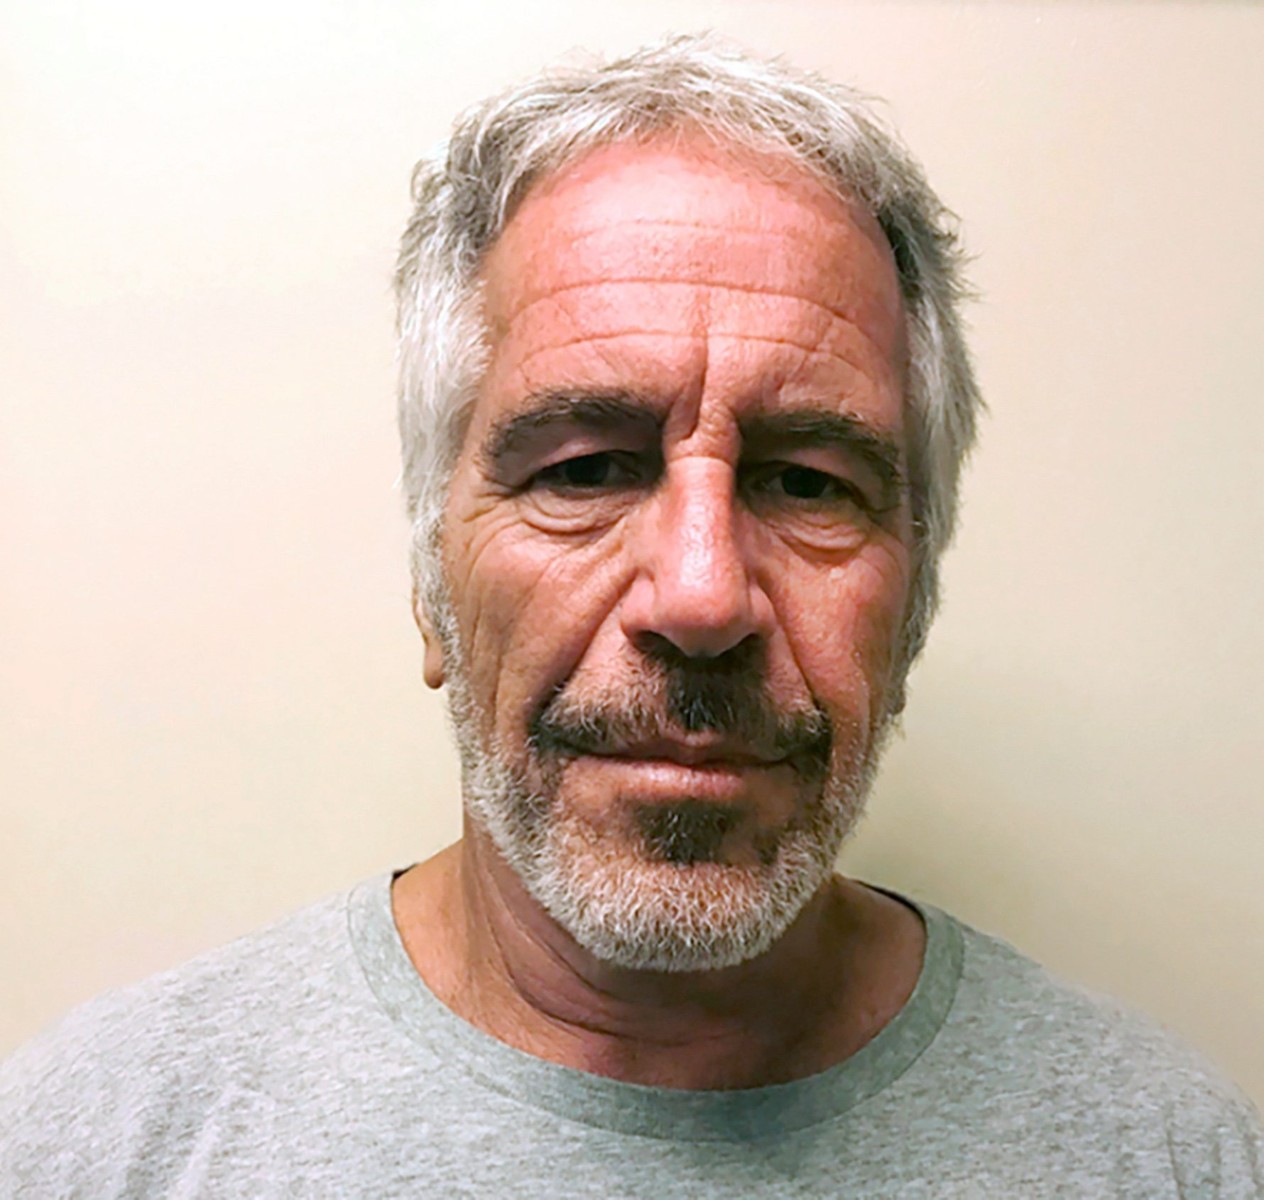 Jeffrey Epstein died in jail while awaiting trial for child sex trafficking offences